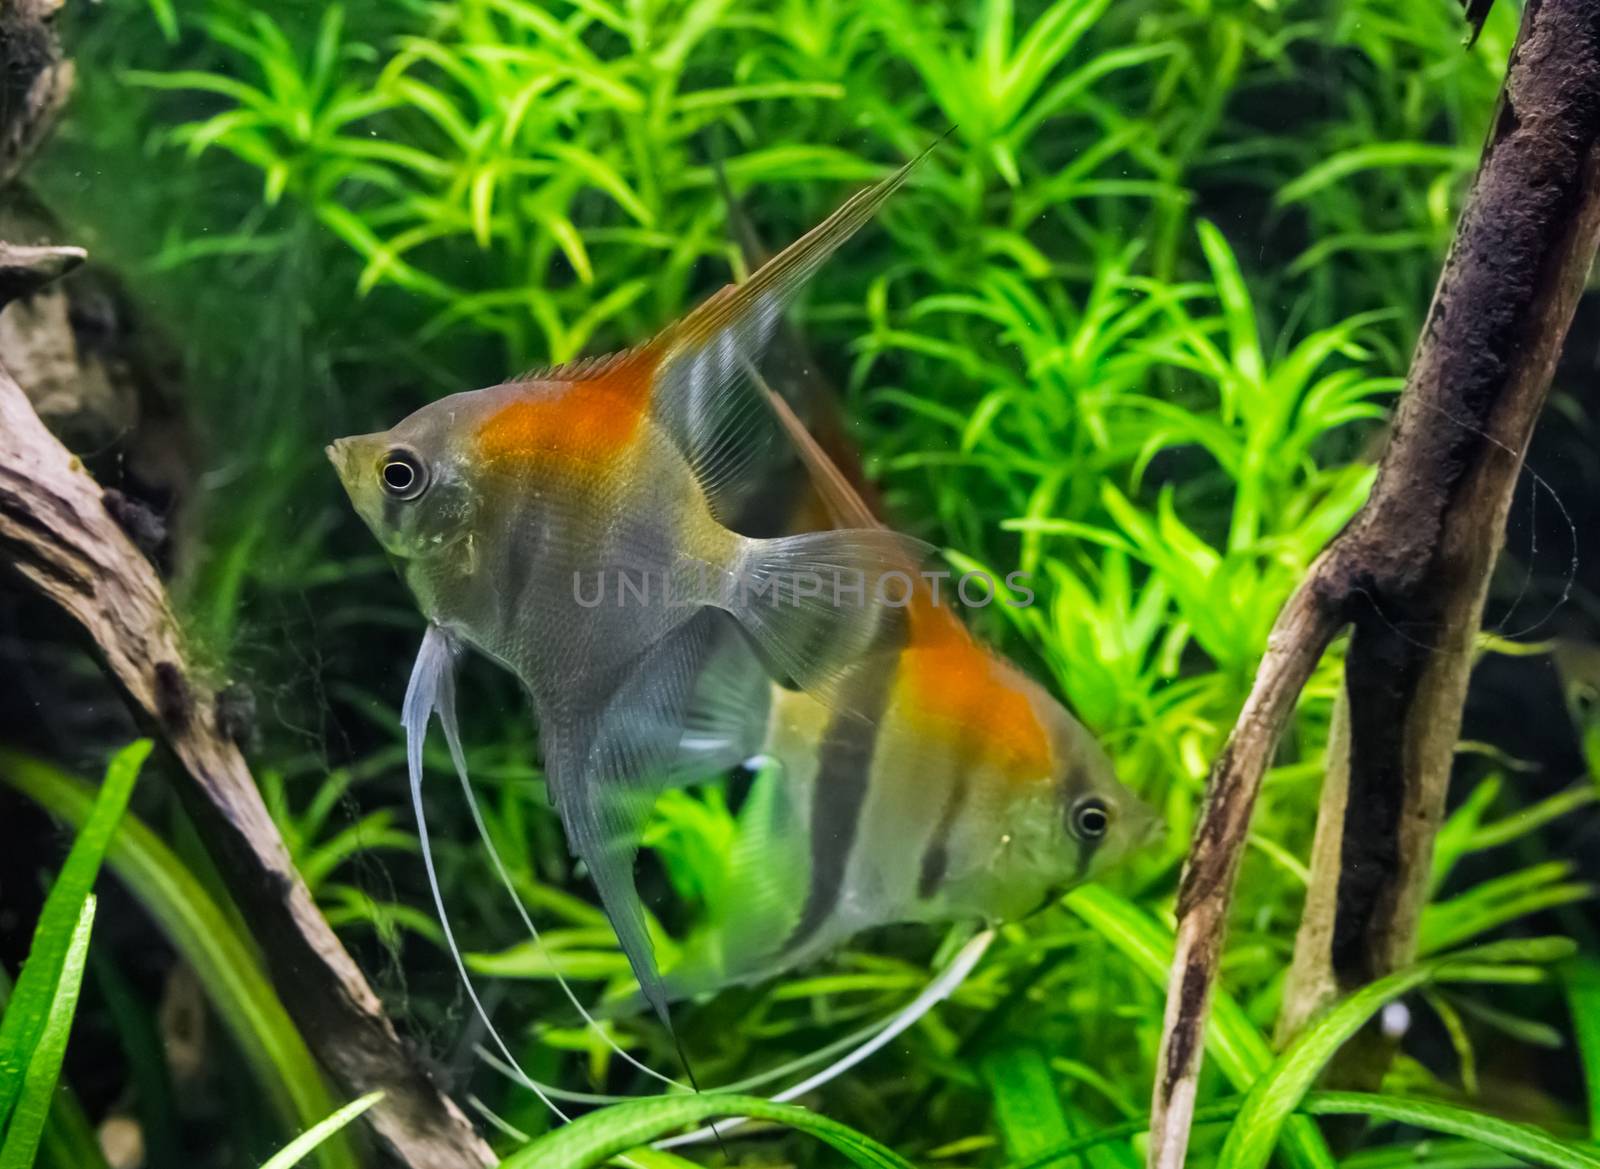 redback moonfishes swimming together in the water, a tropical fish pet from Rio Manacapuru